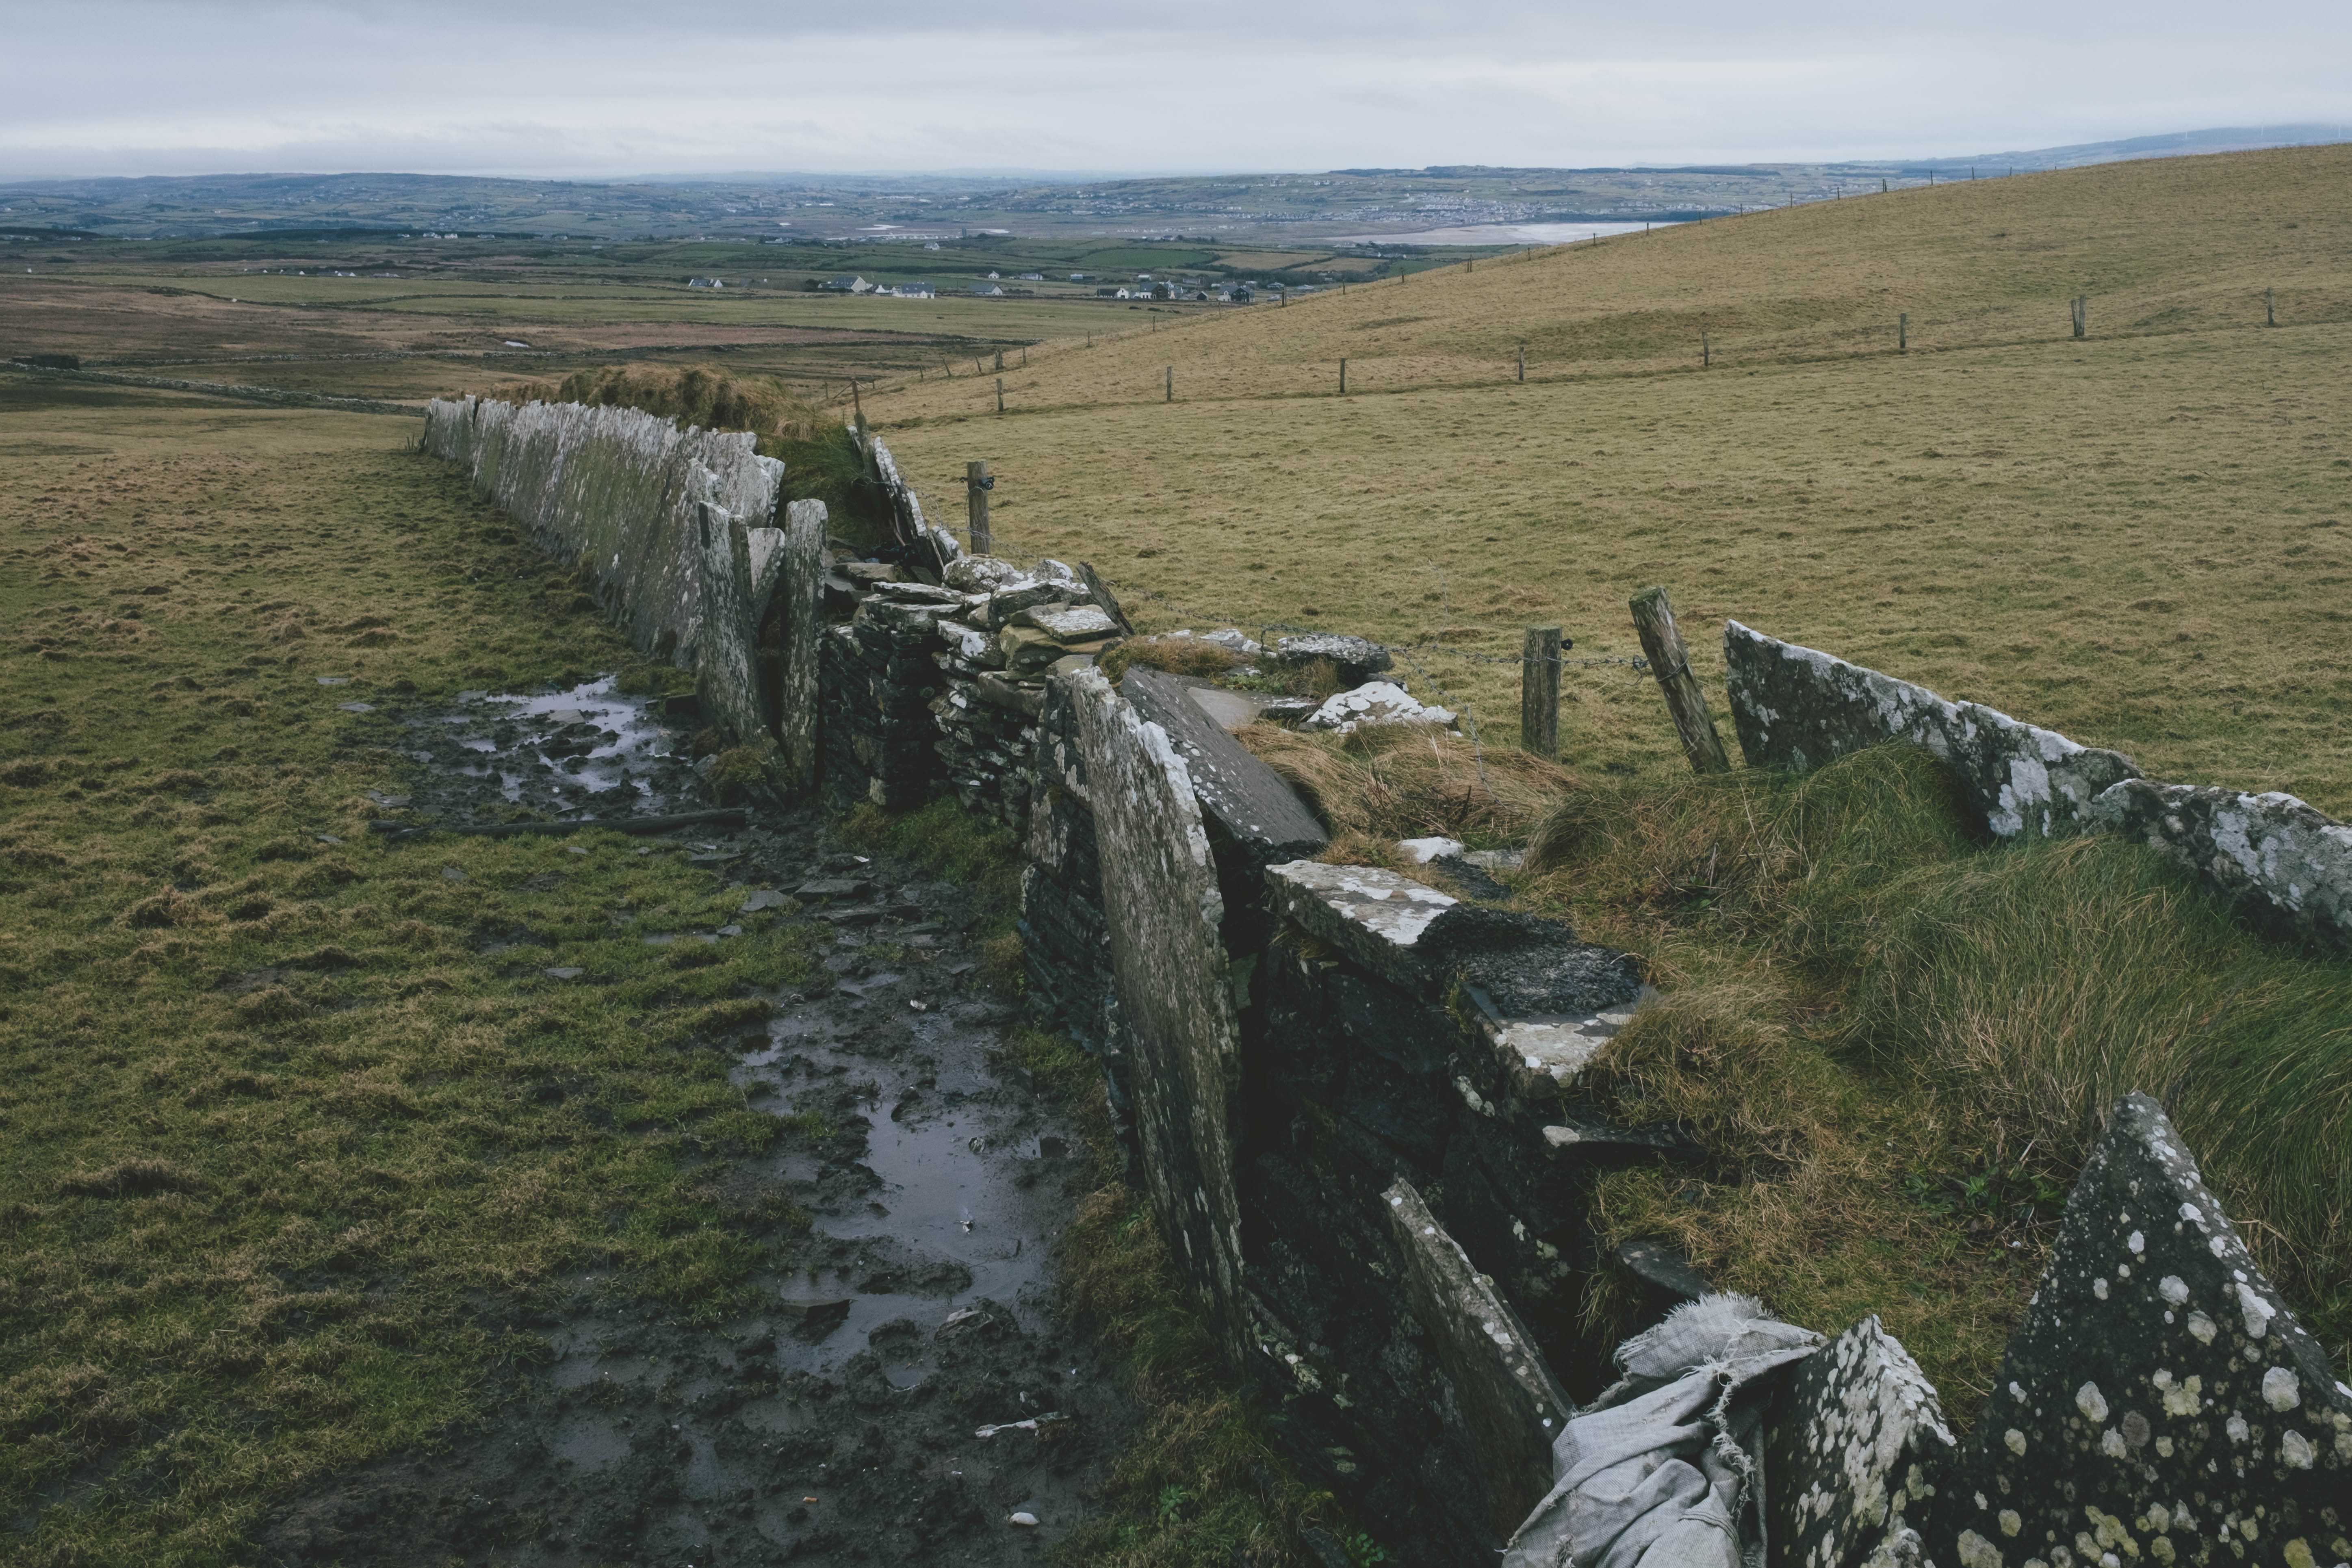 Stone wall in a muddy field with the town distant in the background